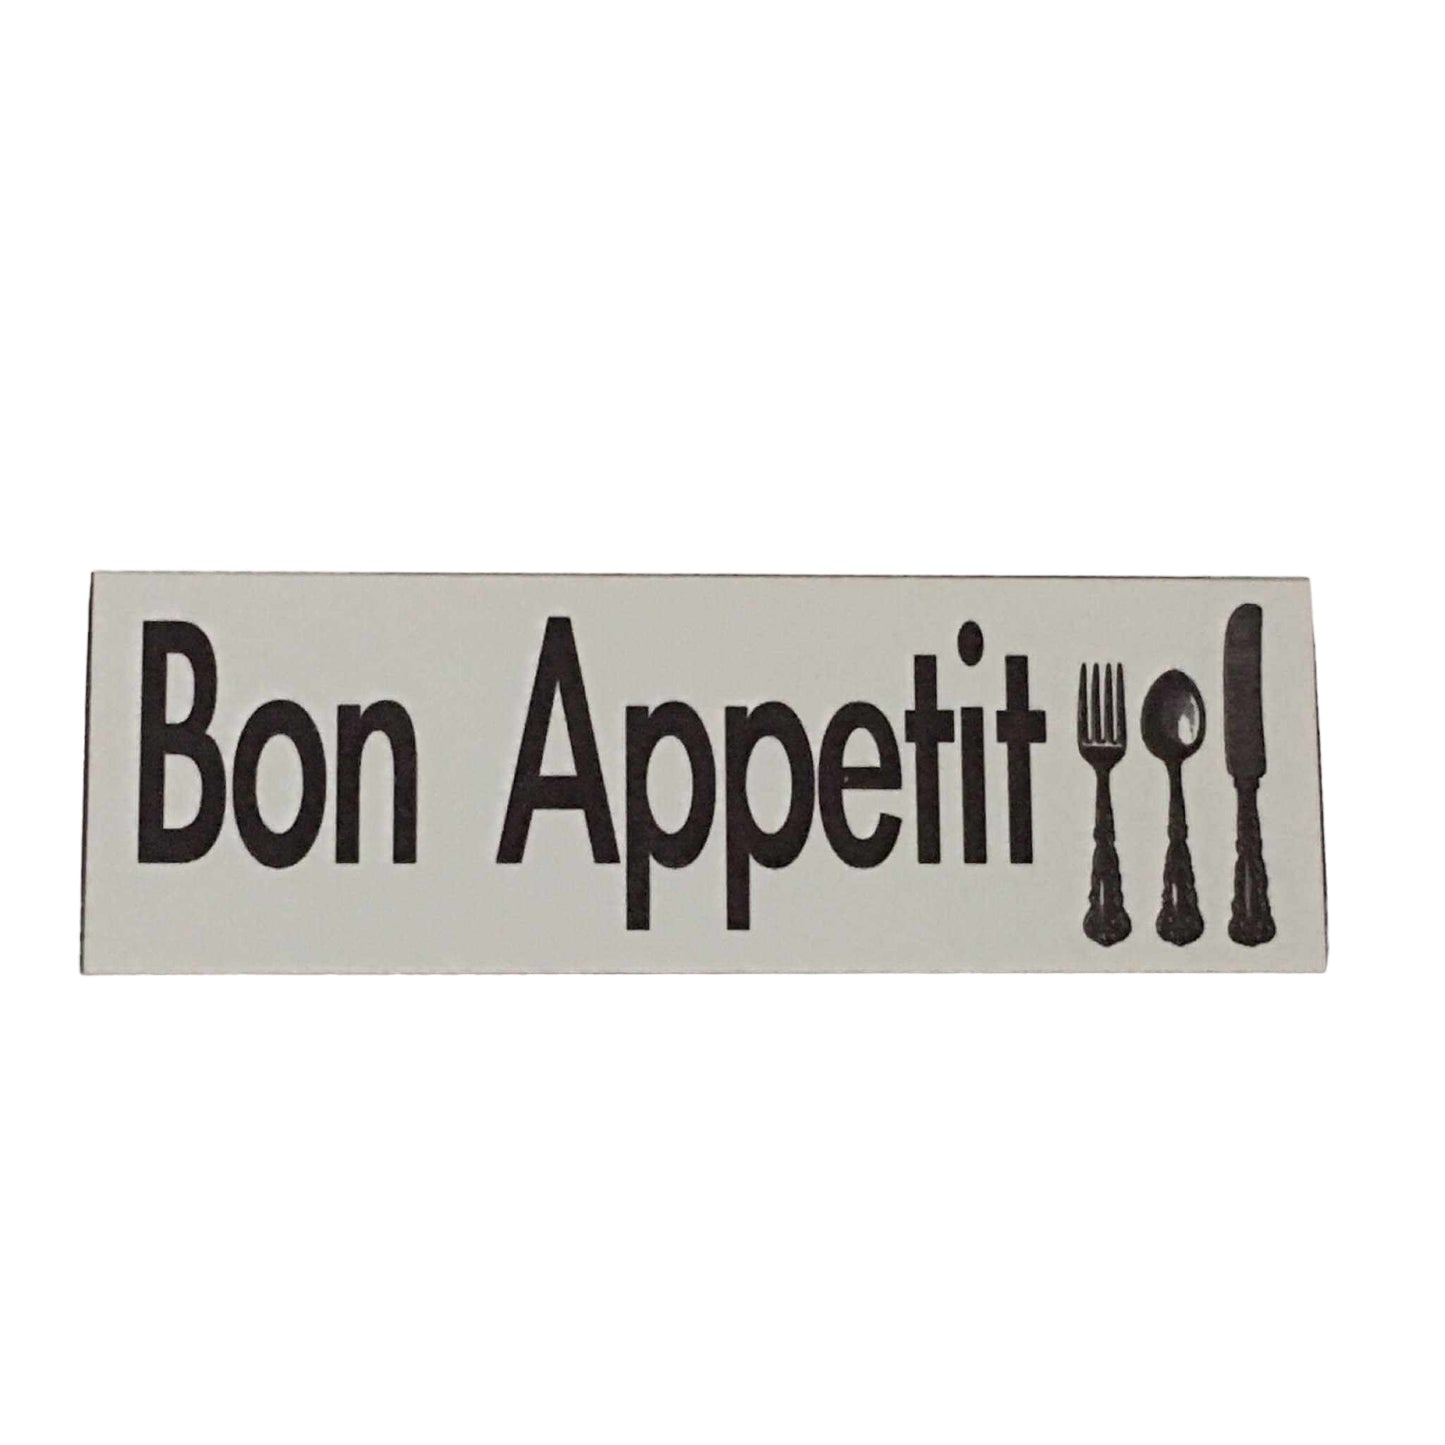 Bon Appetit With Cutlery Sign - The Renmy Store Homewares & Gifts 